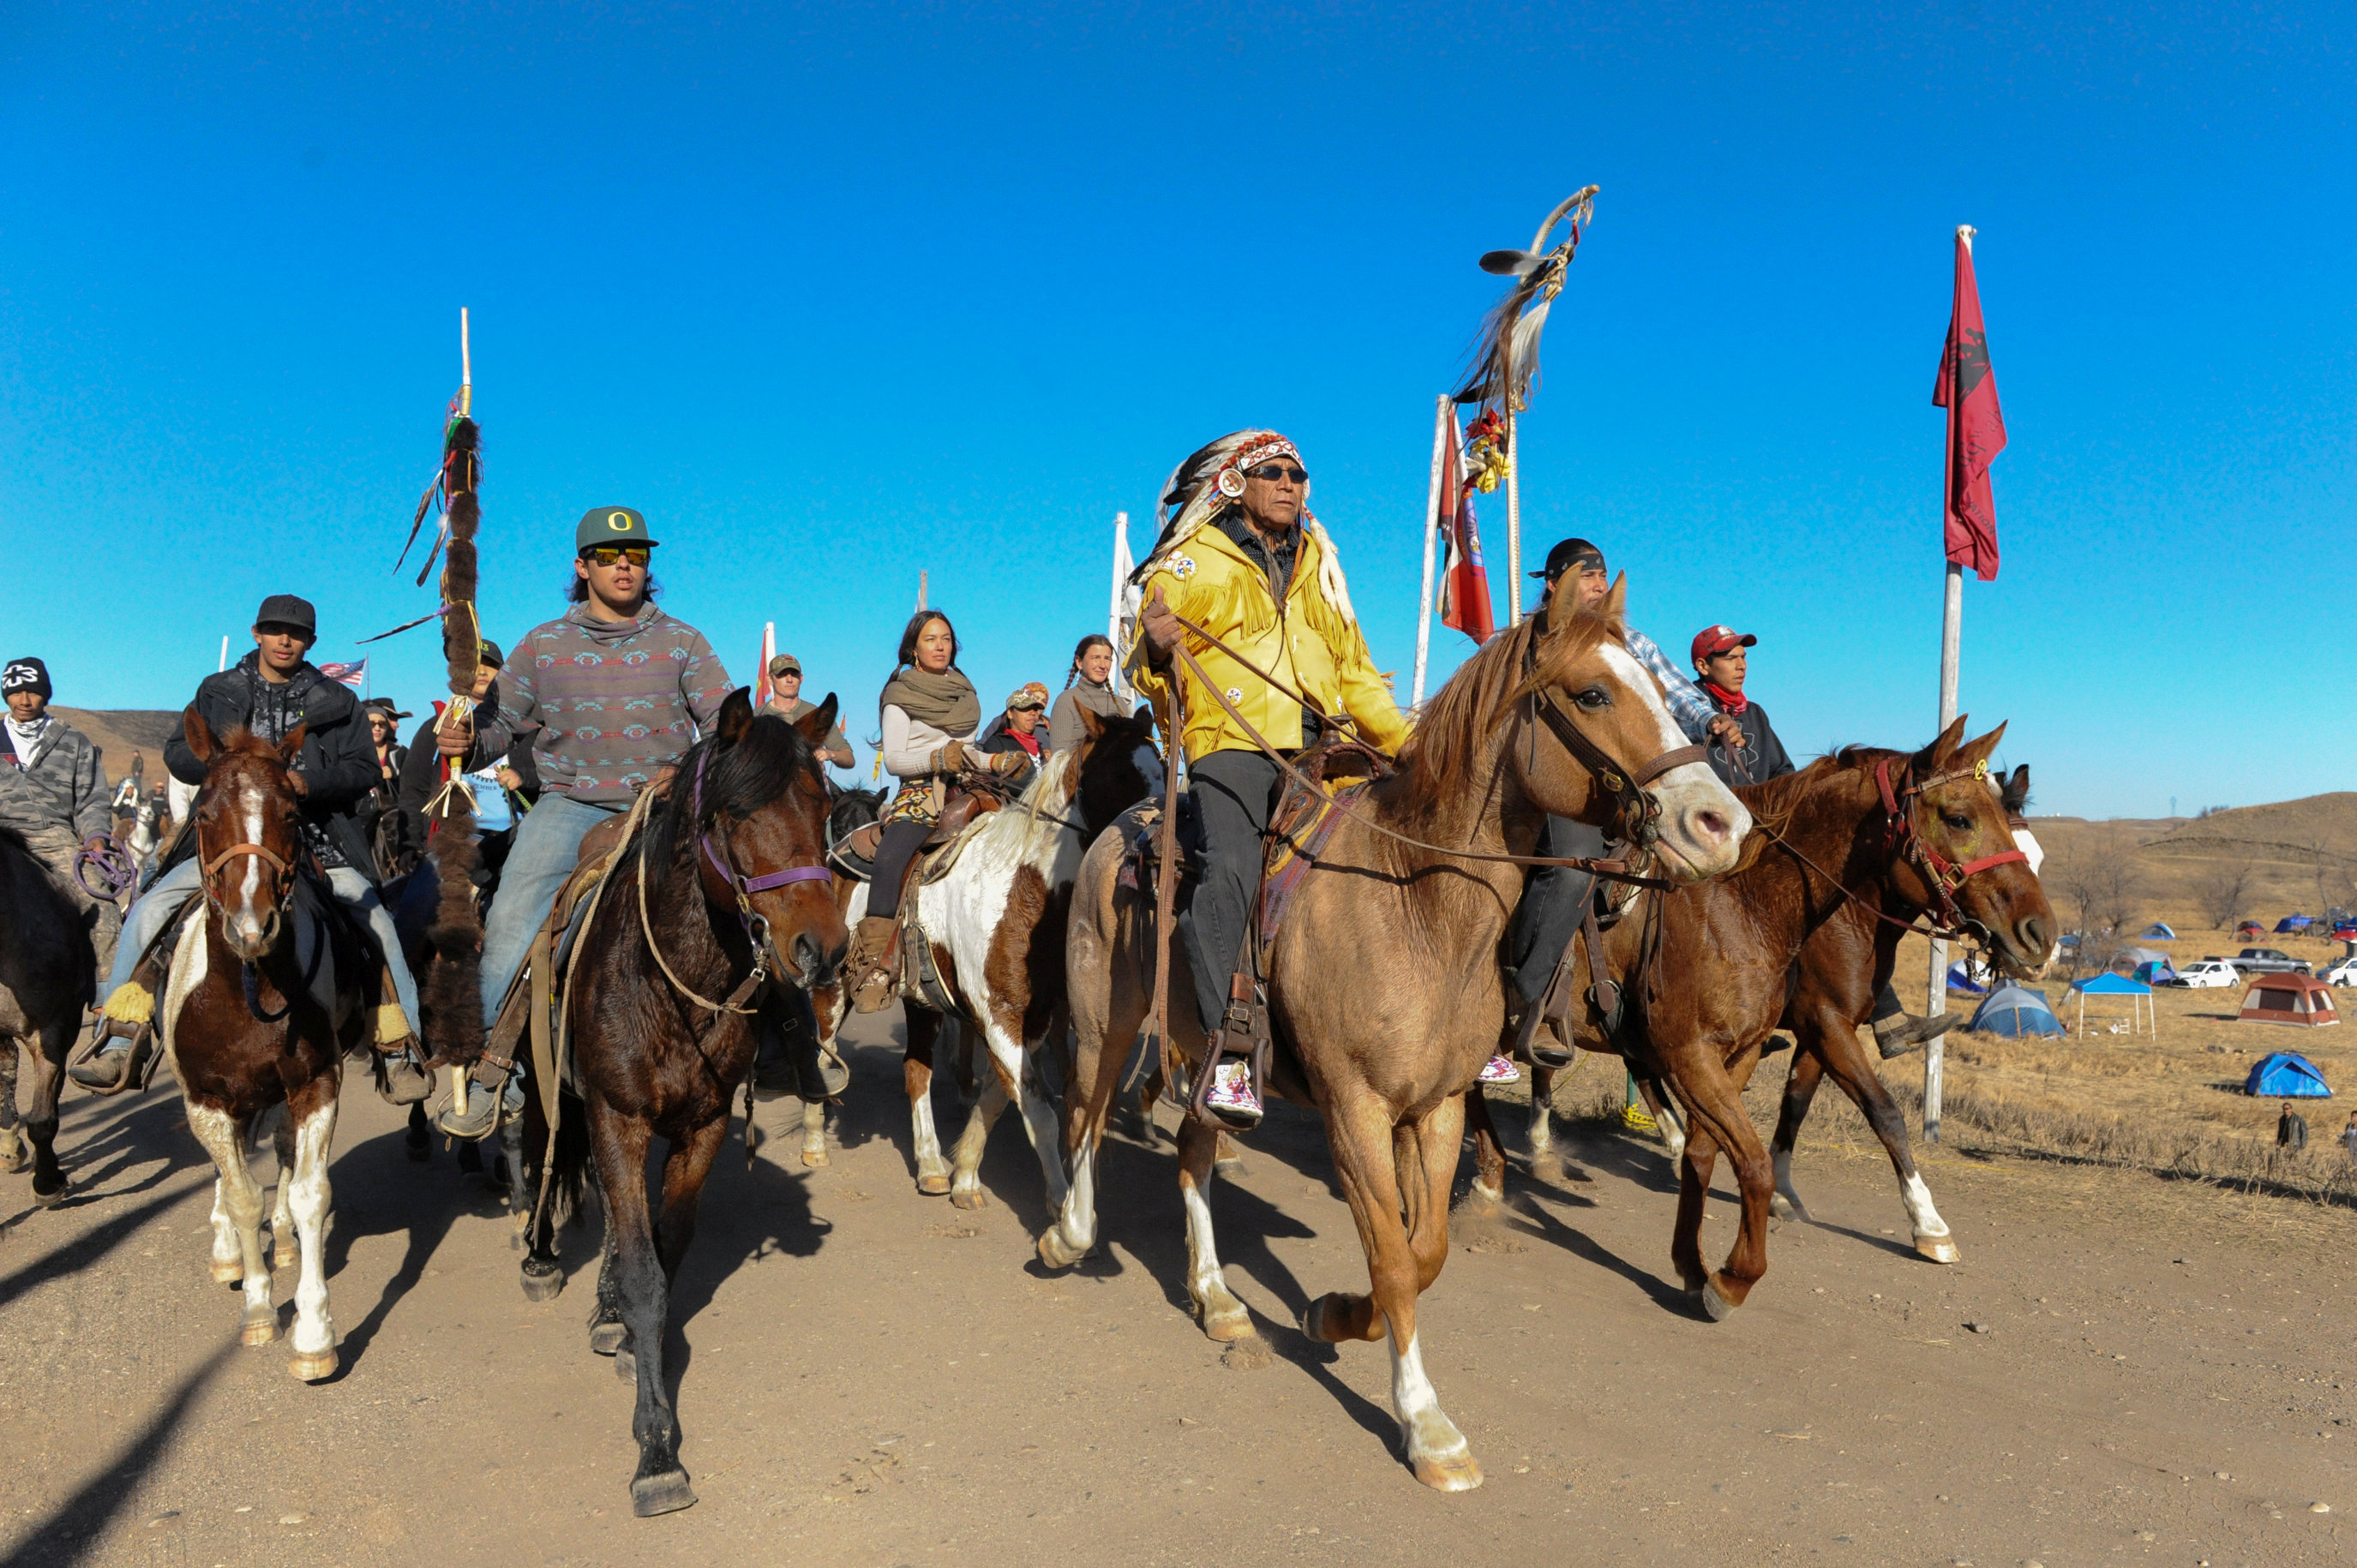 REFILE - CLARIFYING LOCATION Horse riders from the Bigfoot Riders, Dakota 38 Riders, Spirit Riders and the Bigfoot Youth Riders arrive at the Oceti Sakowin camp during a protest of the Dakota Access pipeline near the Standing Rock Indian Reservation near Cannon Ball, North Dakota November 5, 2016. REUTERS/Stephanie Keith